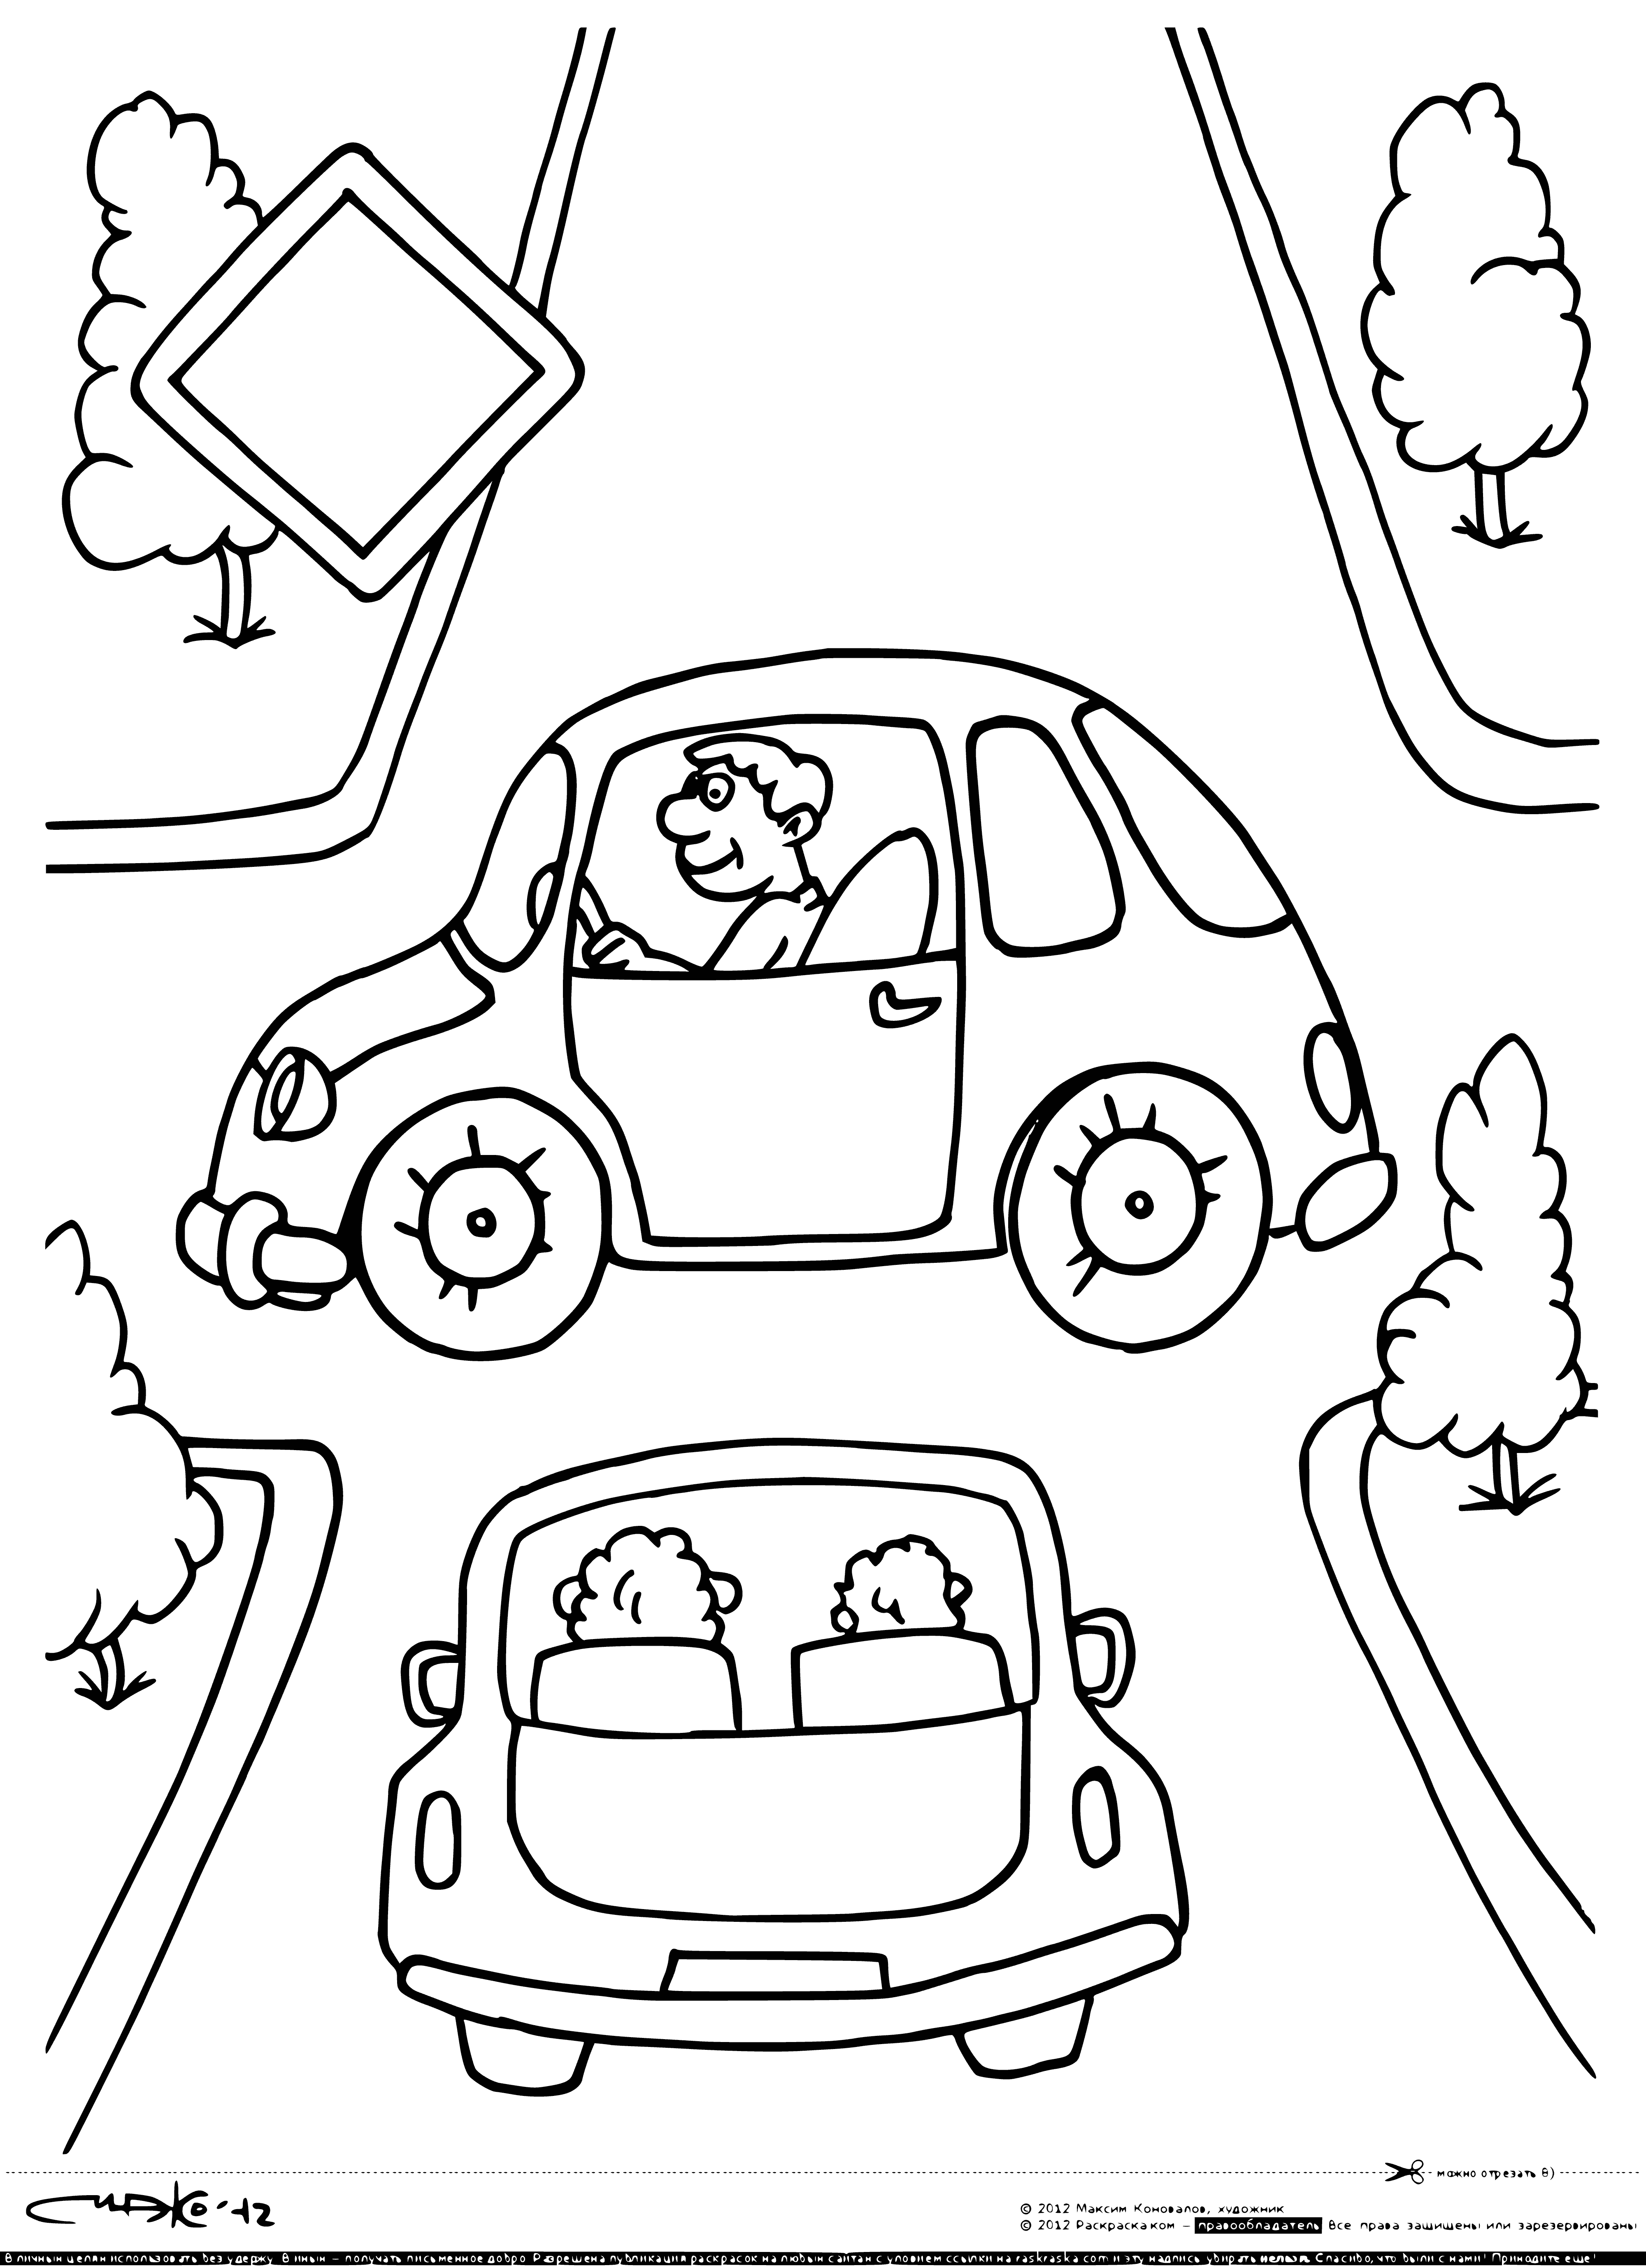 coloring page: Sign pointing right: "Traffic Rules - the main road". Coloring page to teach kids about traffic rules. #coloring #traffic #rules